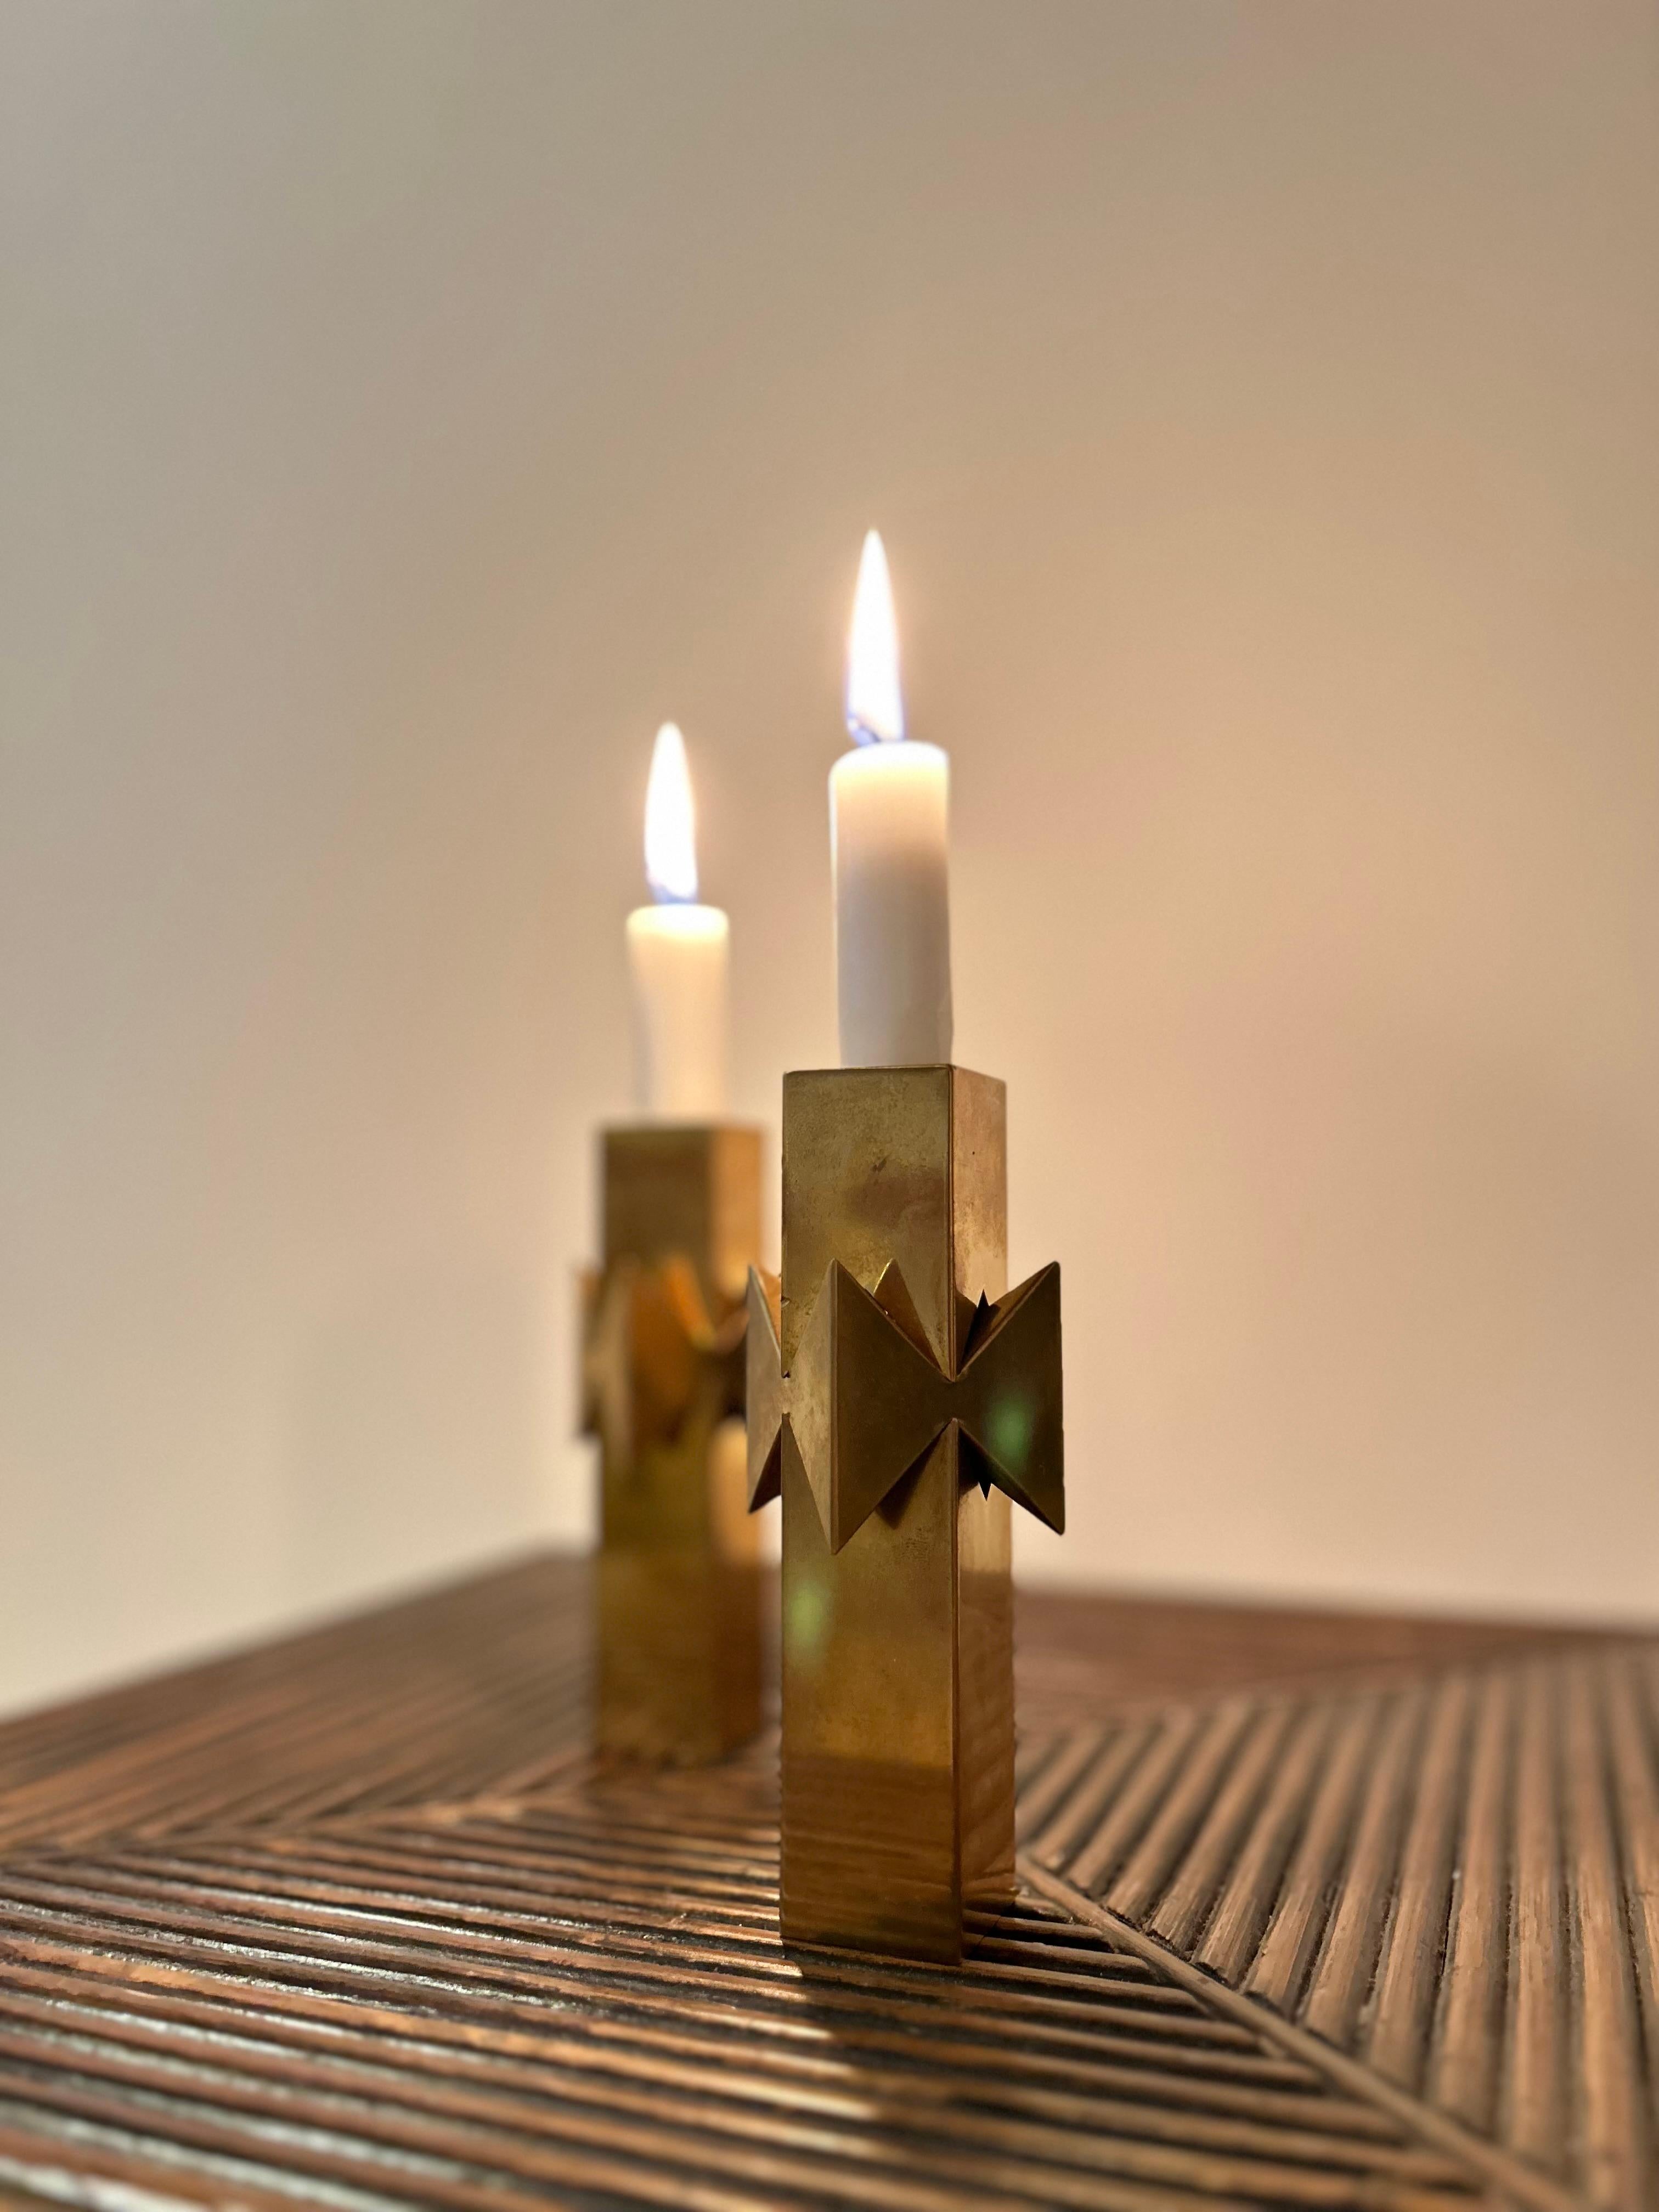 Rare Pair of Pierre Forssell candle sticks model Rosett in solid brass manufactured in Sweden by Skultuna in the 1980’s.

The pair of candle sticks are in good condition with a beautiful natural patina which has come from years of use.

Candle